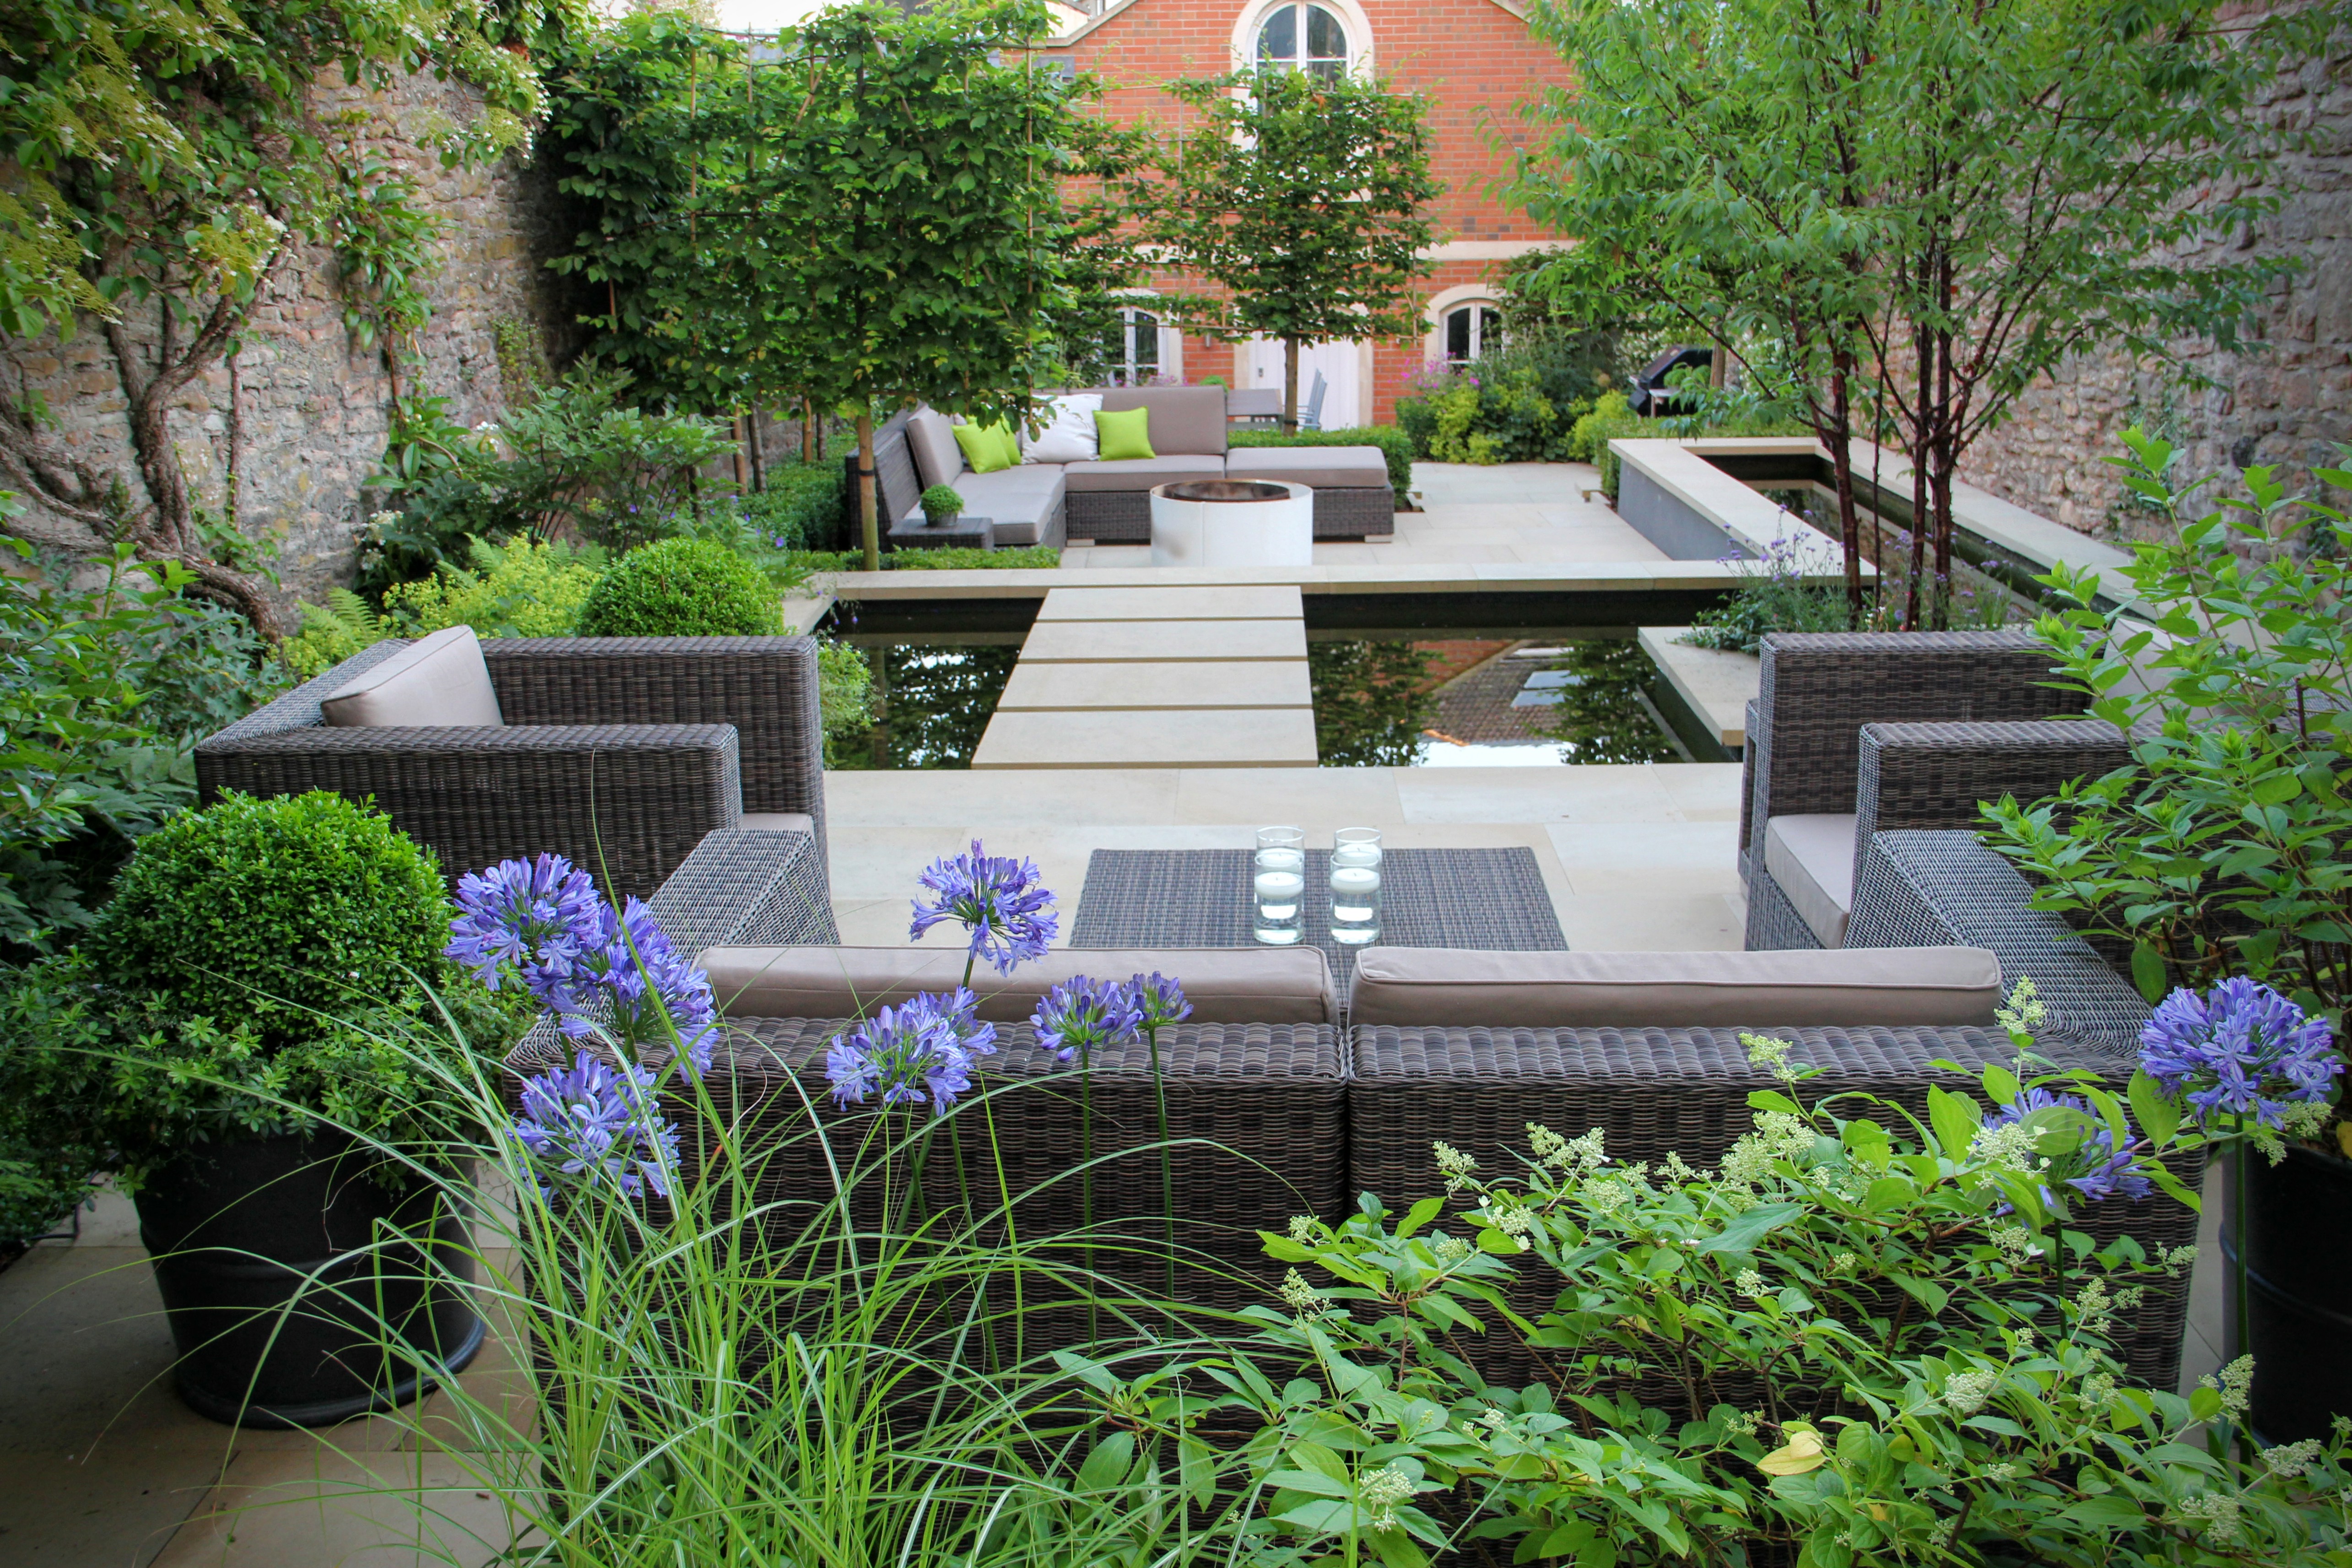 </p> <p>Find your ideal home design pro on designfor-me.com - get matched and see who's interested in your home project. Click image to see more inspiration from our design pros</p> <p>Design by Karena, garden designer from Bristol, City of, South West</p> <p> #gardendesign #gardeninspiration #gardenlove #gardenideas #gardens </p> <p>